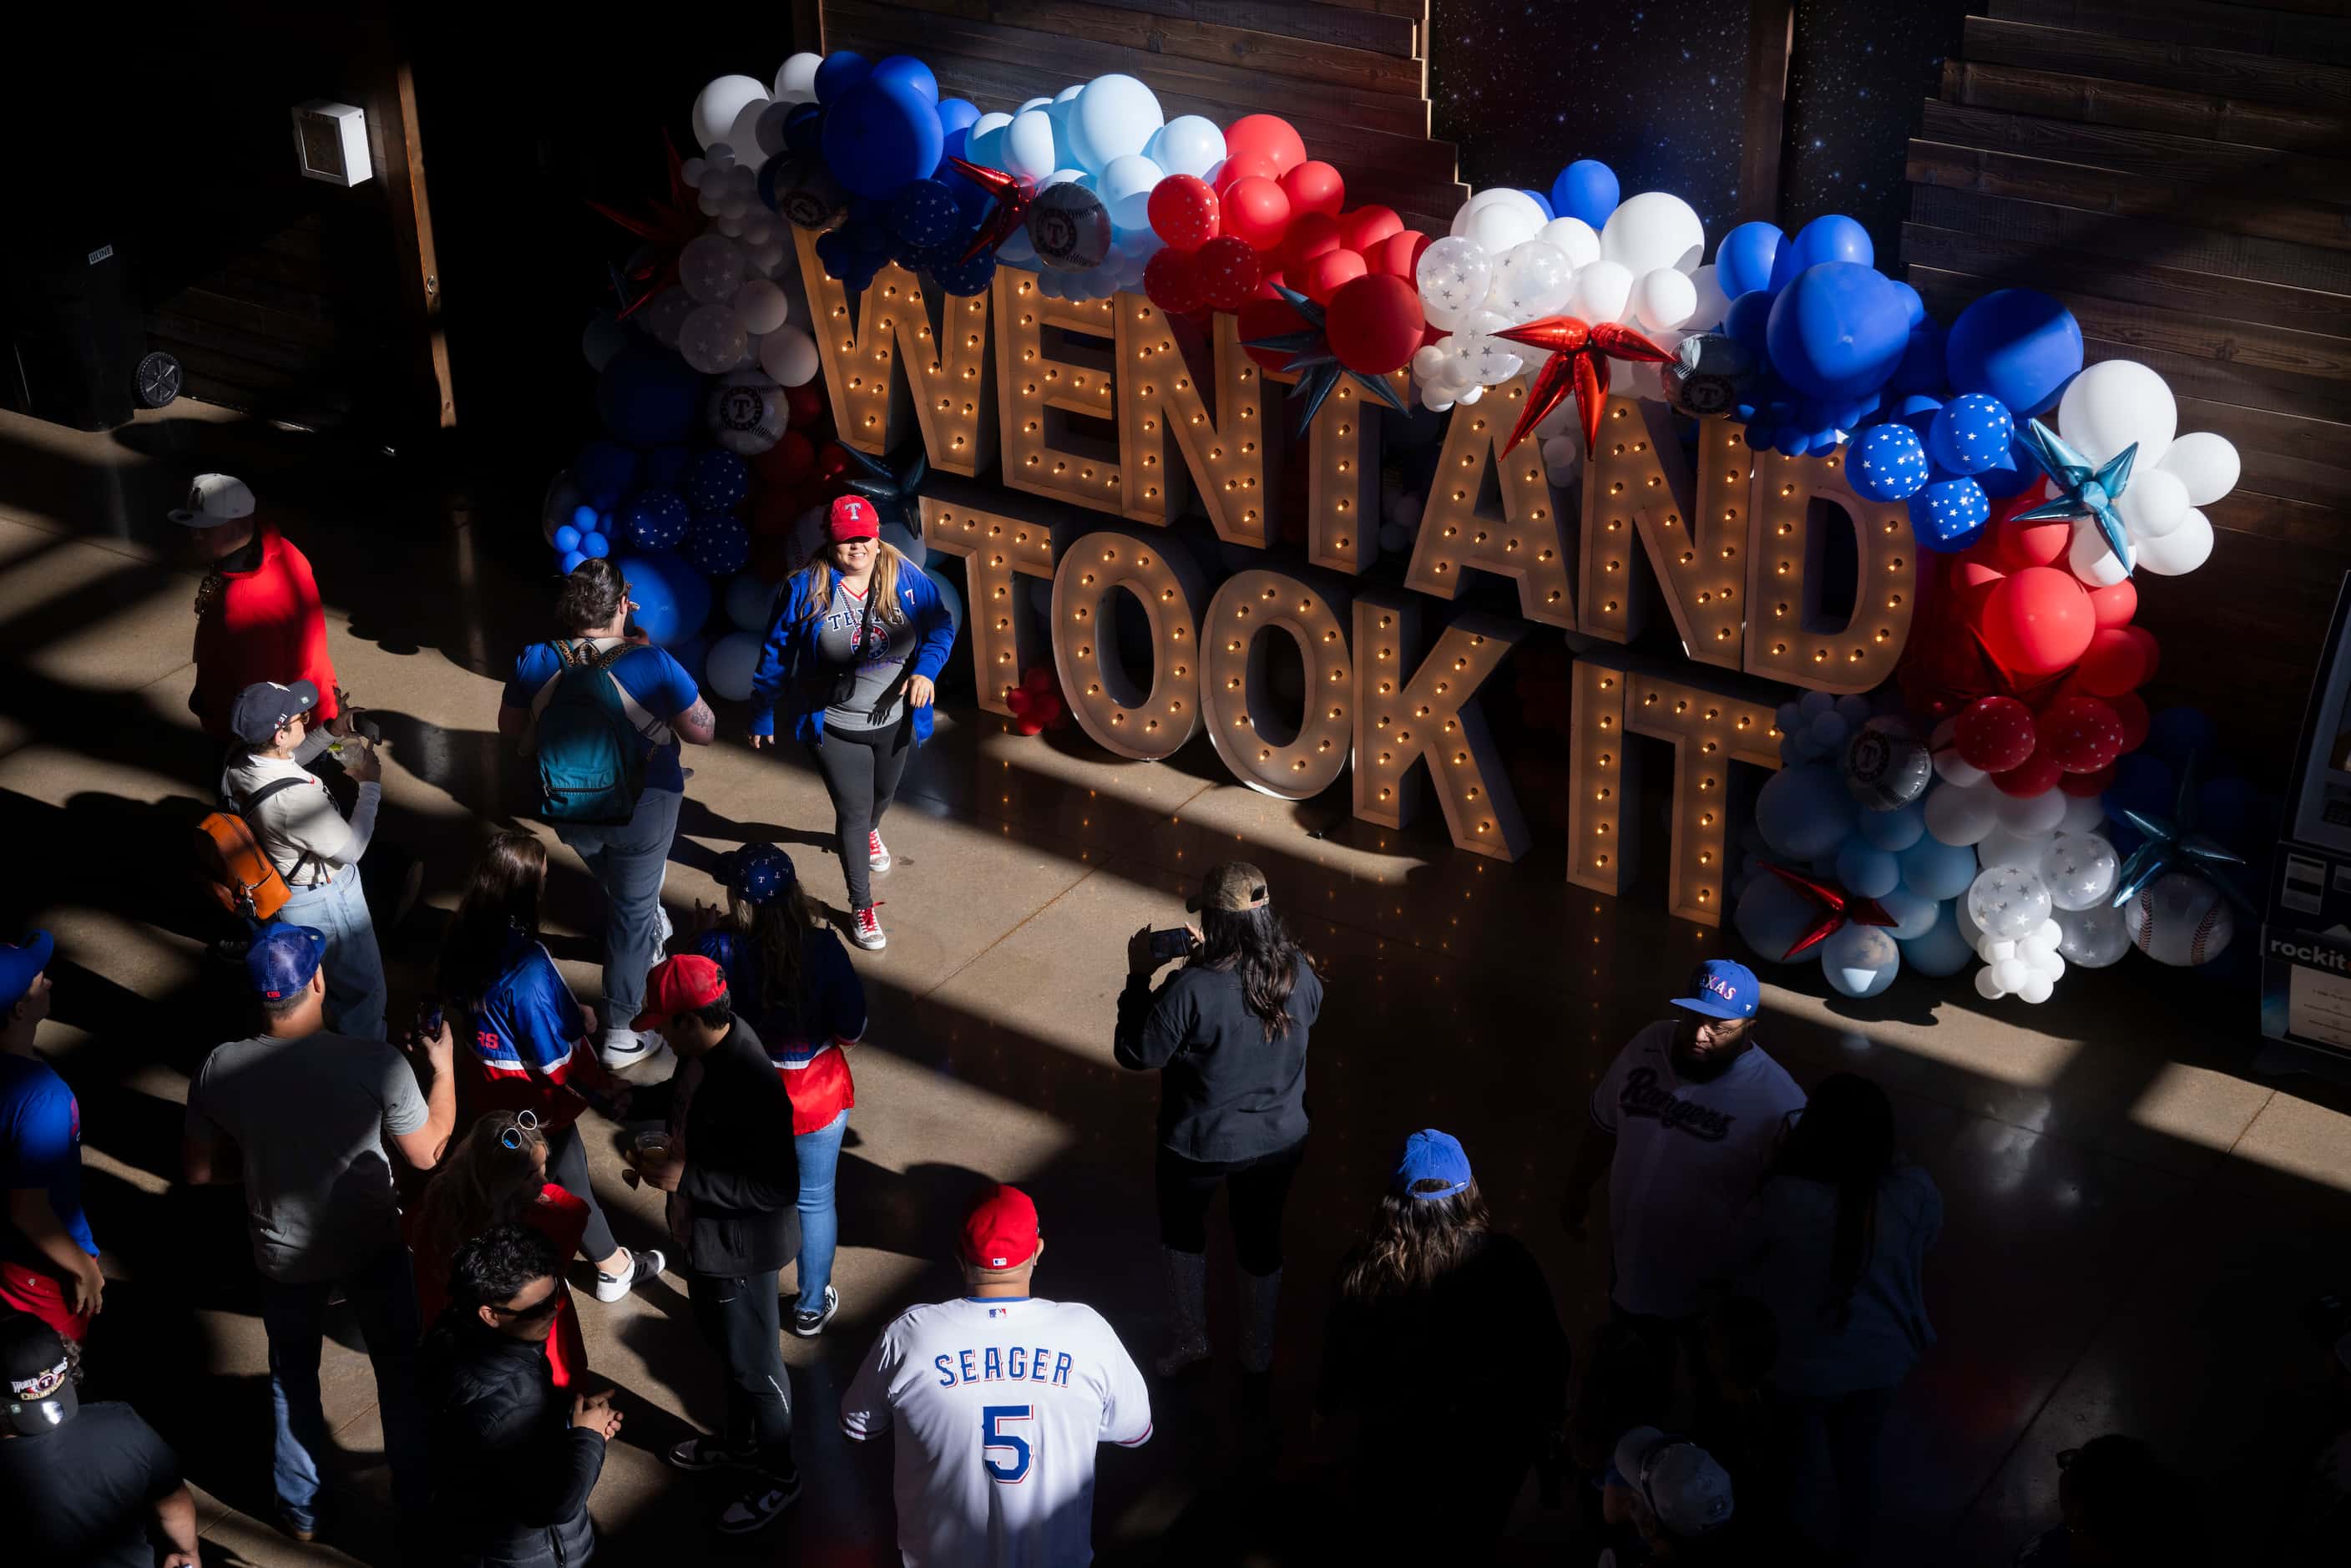 Fans walk by Texas Live!’s “Went and took it” sign in Arlington during the Texas Rangers...